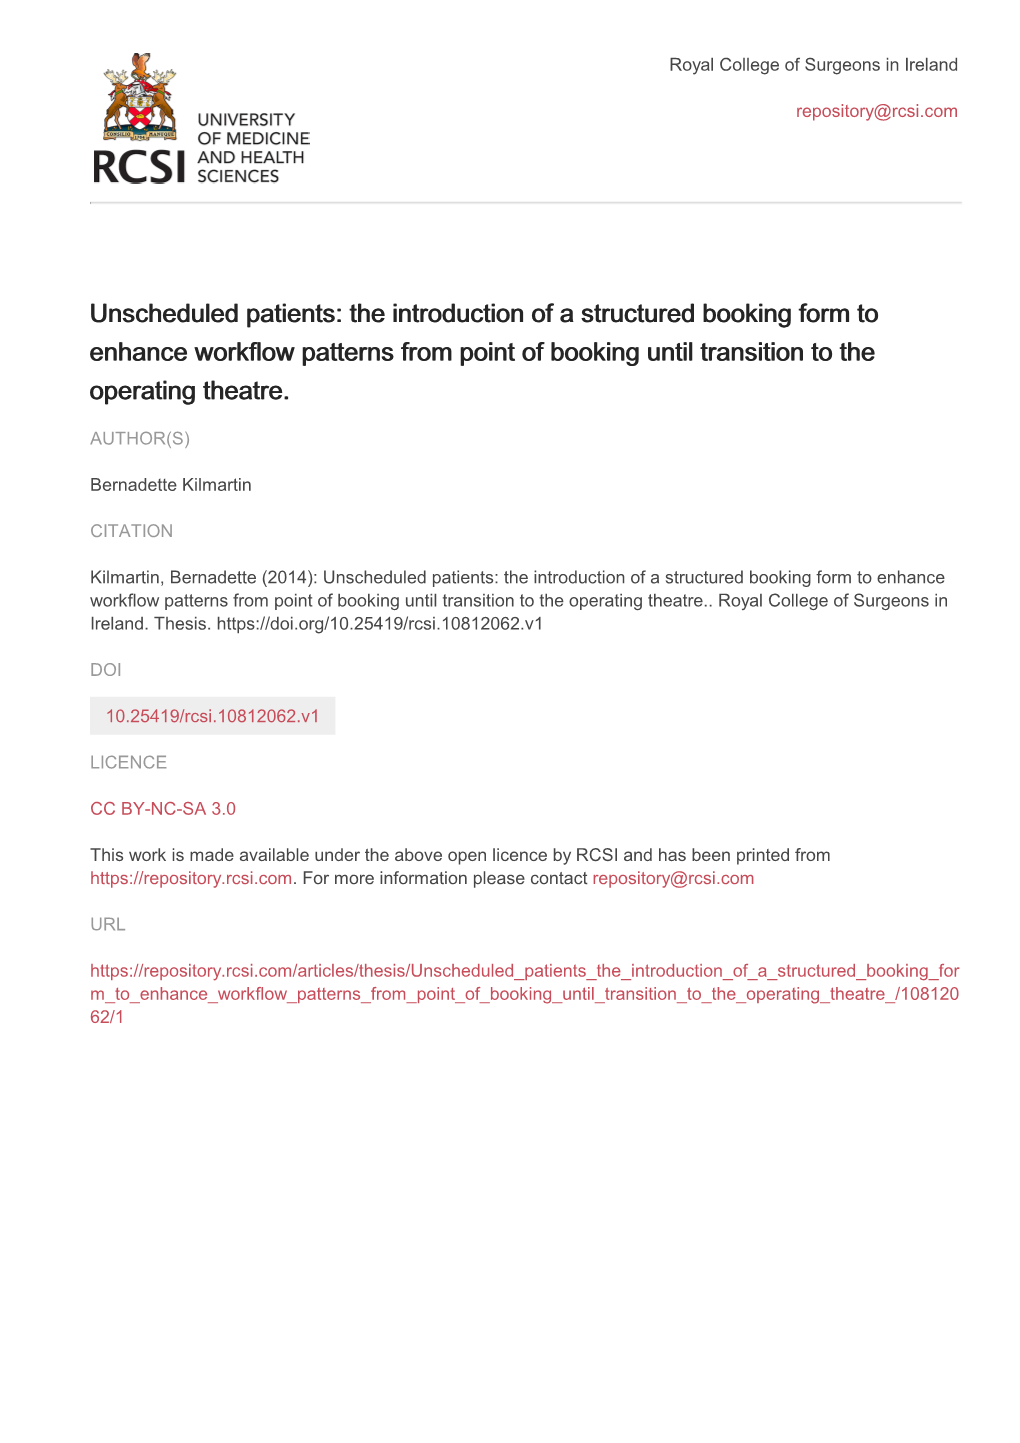 Unscheduled Patients: the Introduction of a Structured Booking Form to Enhance Workflow Patterns from Point of Booking Until Transition to the Operating Theatre